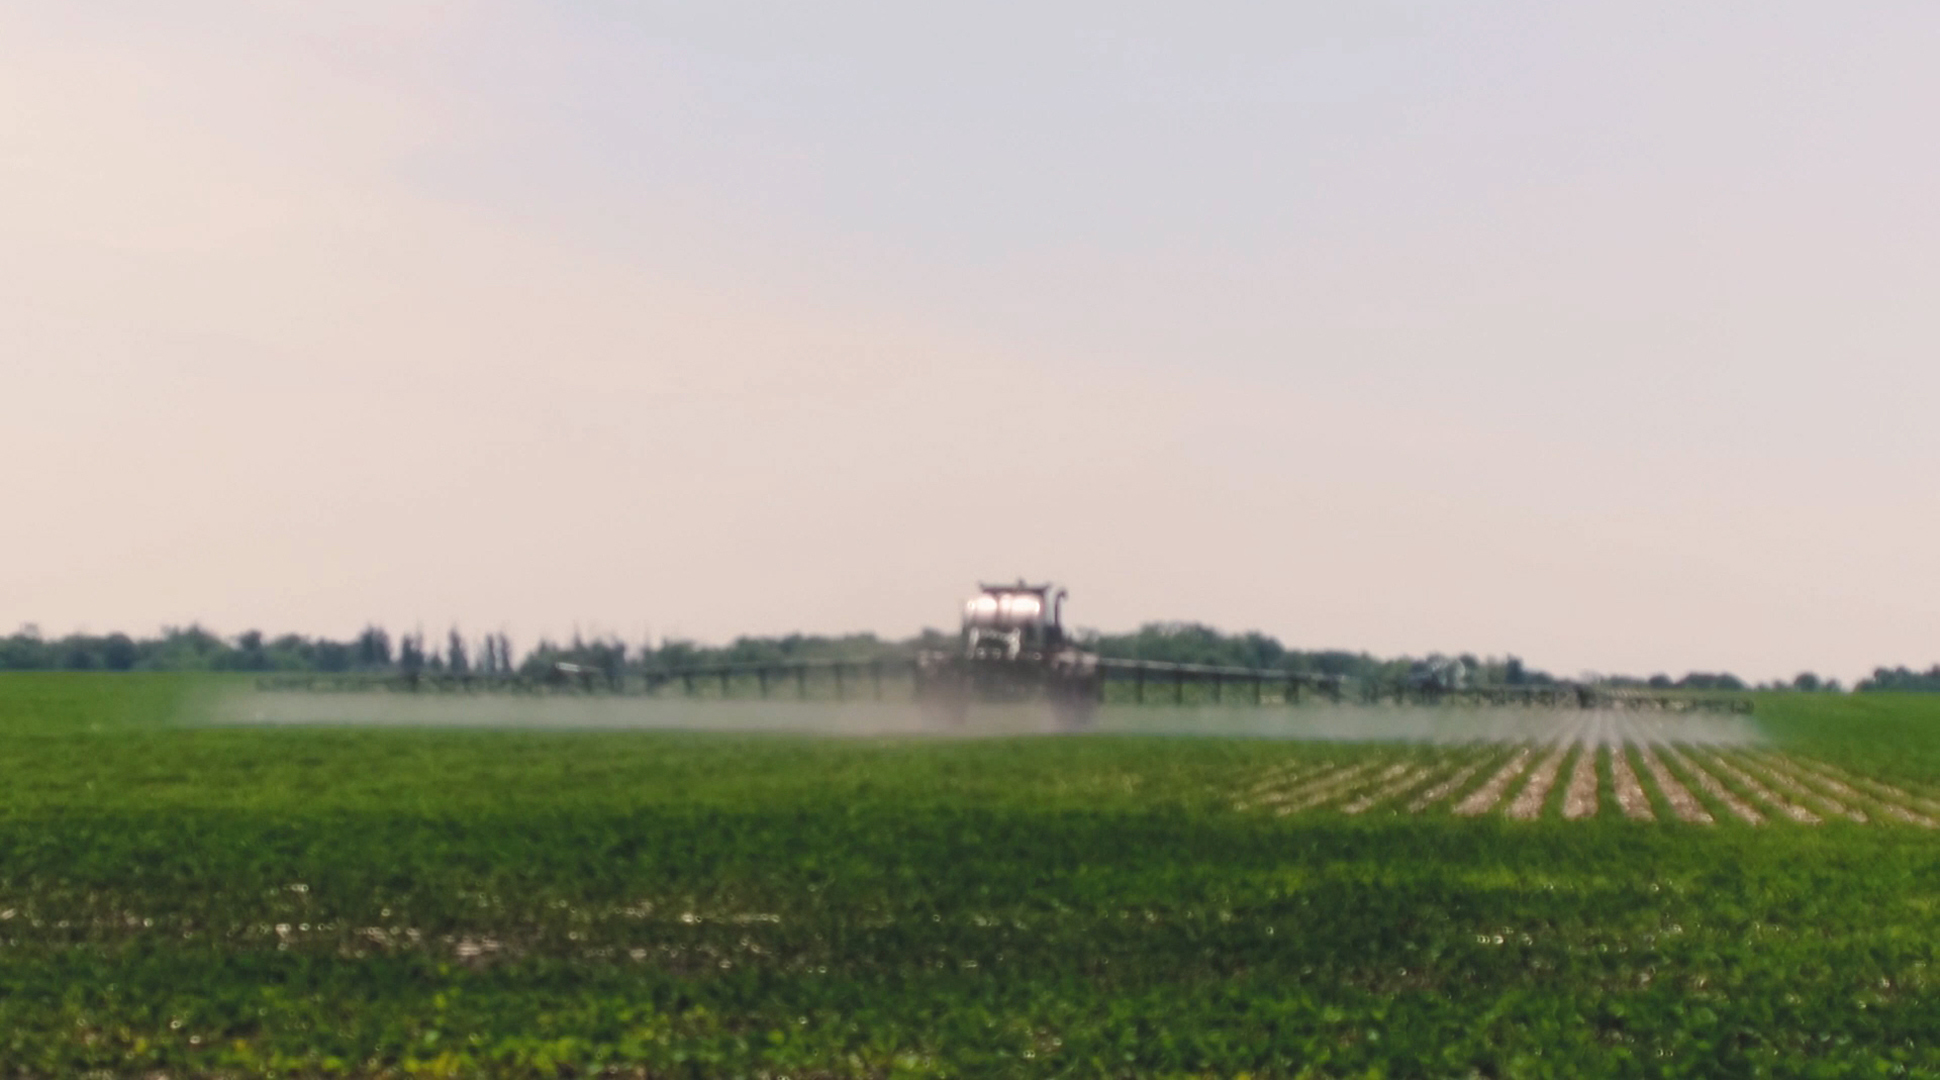 Pesticides and Food: It's not a black or white issue